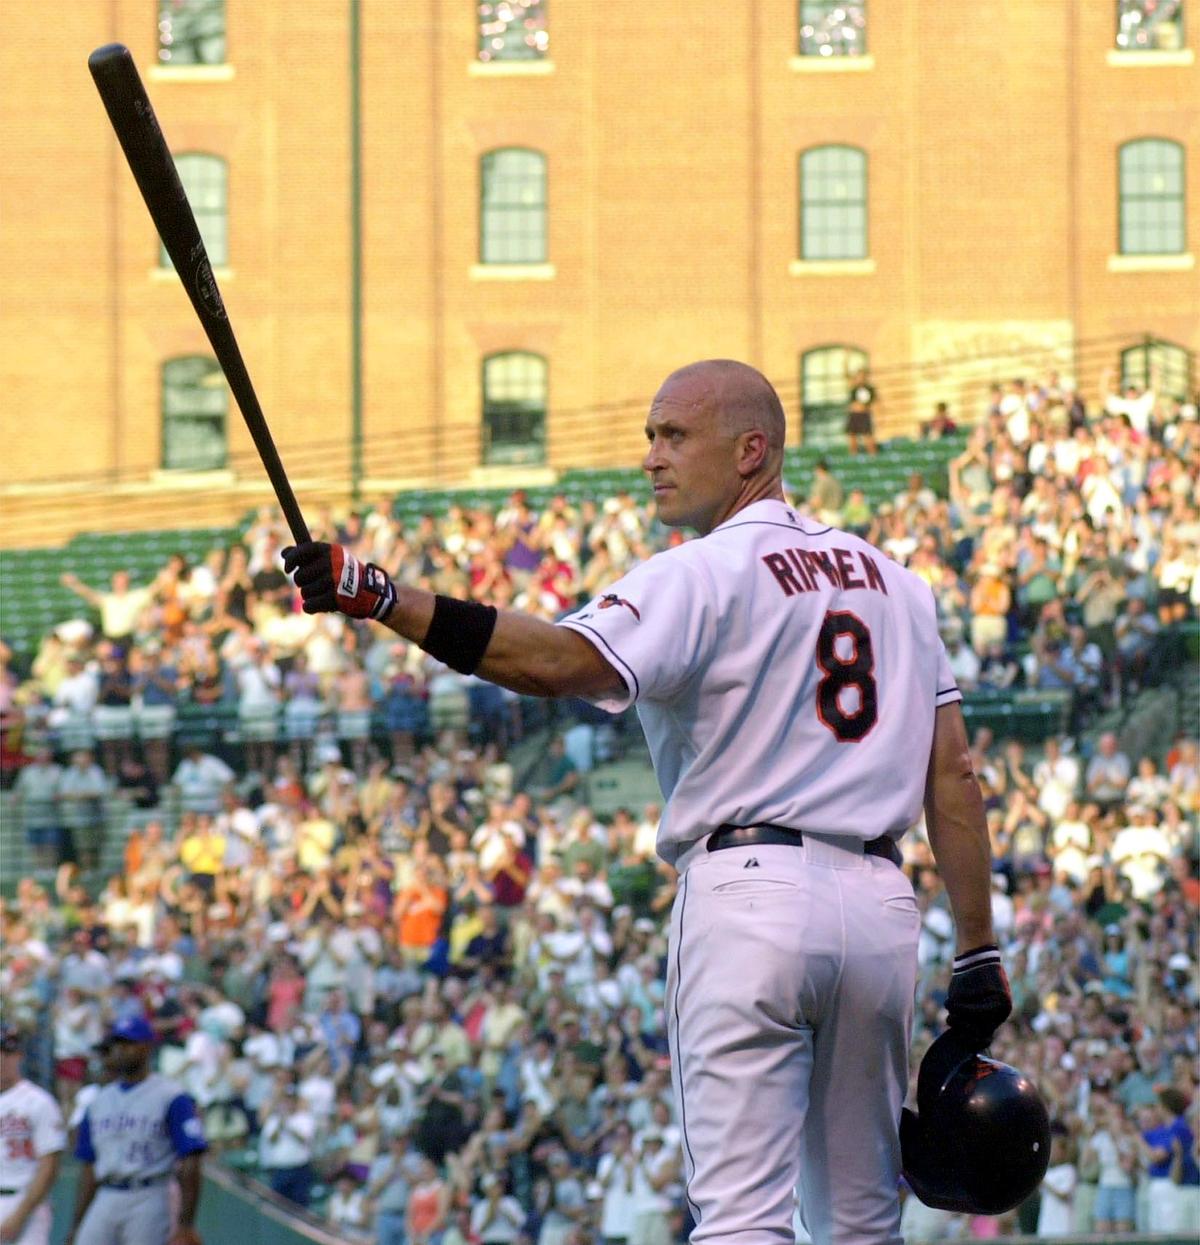 The Baltimore Orioles' Cal Ripken, Jr. acknowledges the crowd's standing ovation before his first at bat during the game against the Toronto Blue Jays June 19, 2001, at Camden Yards in Baltimore, Md. (HEATHER HALL/AFP via Getty Images)